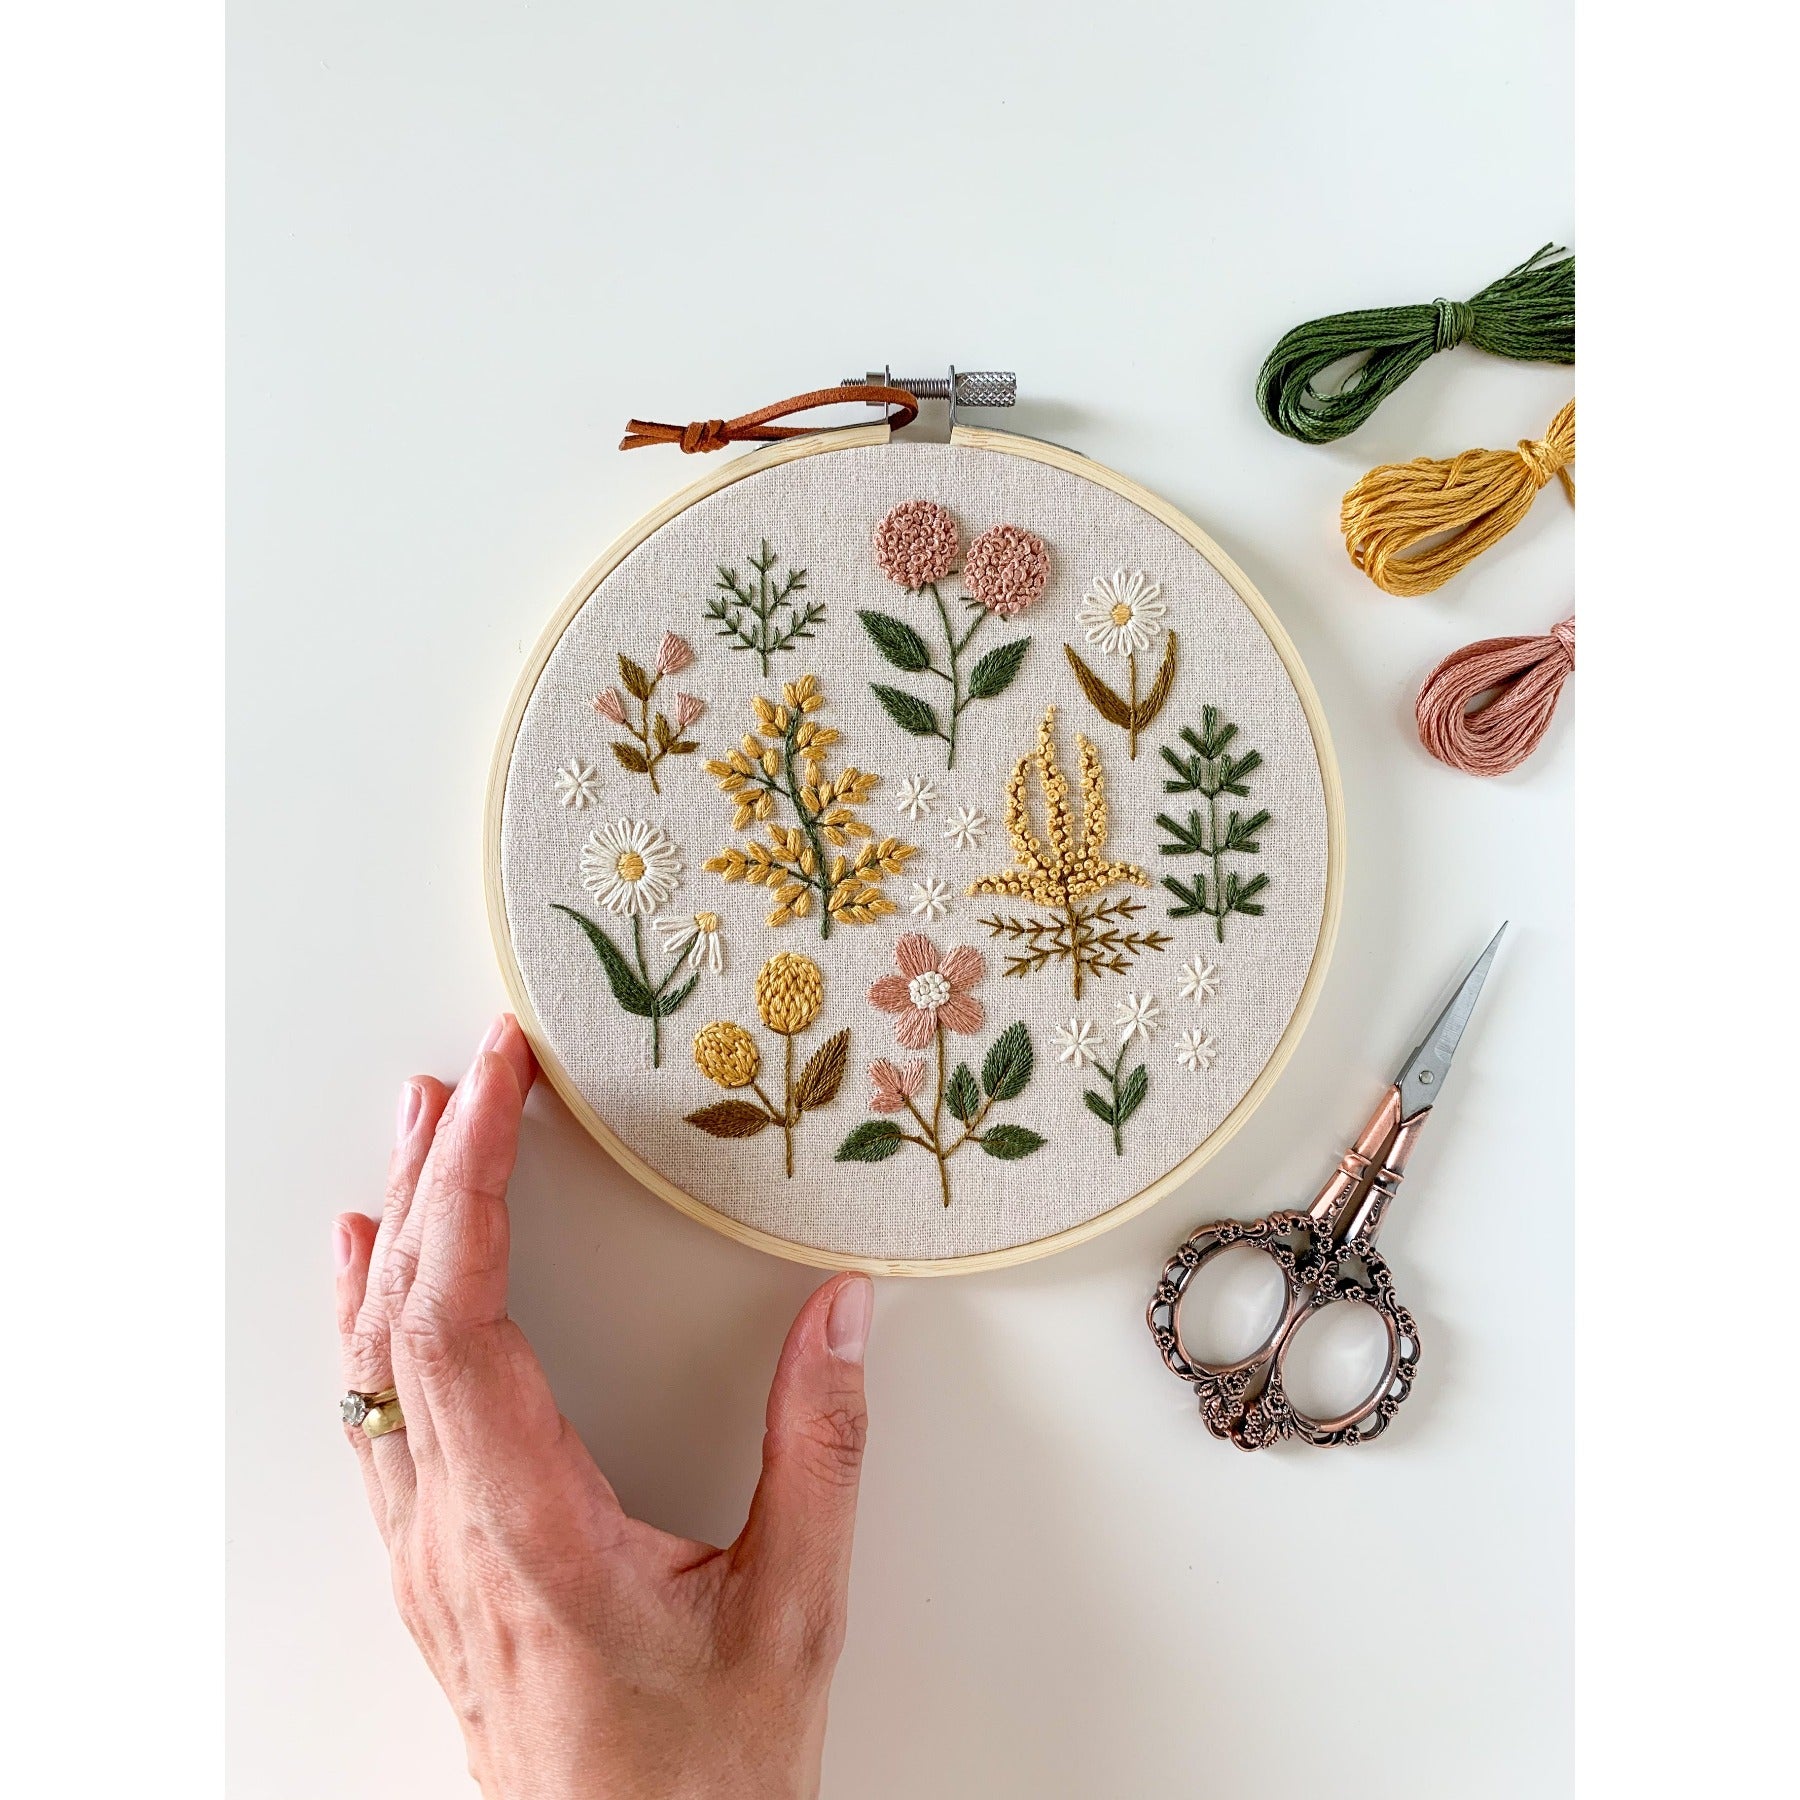 Floral Embroidery – Space and Material